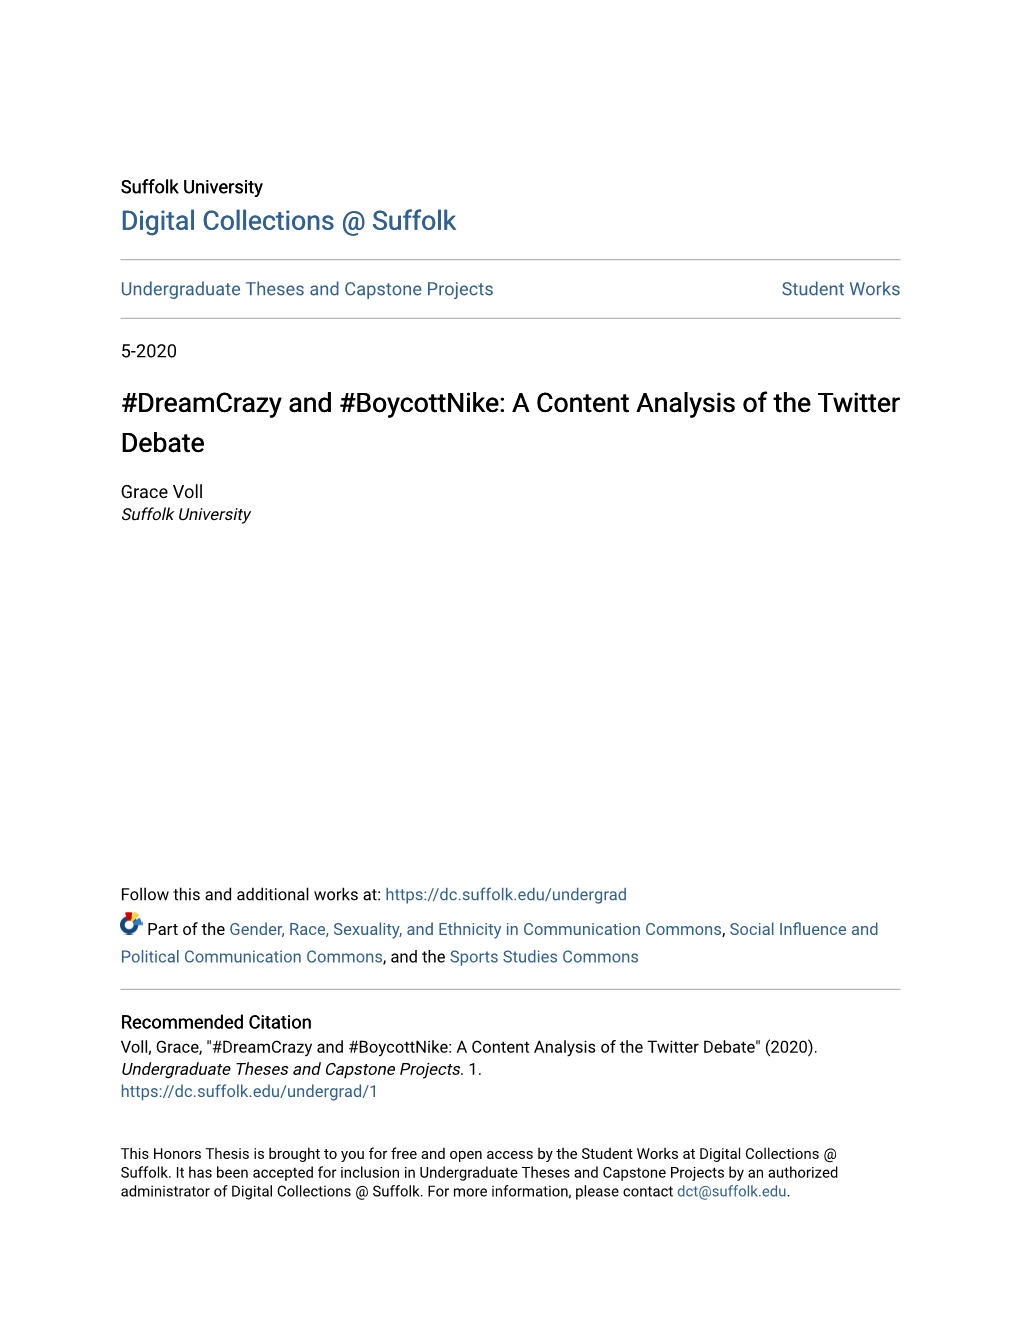 A Content Analysis of the Twitter Debate